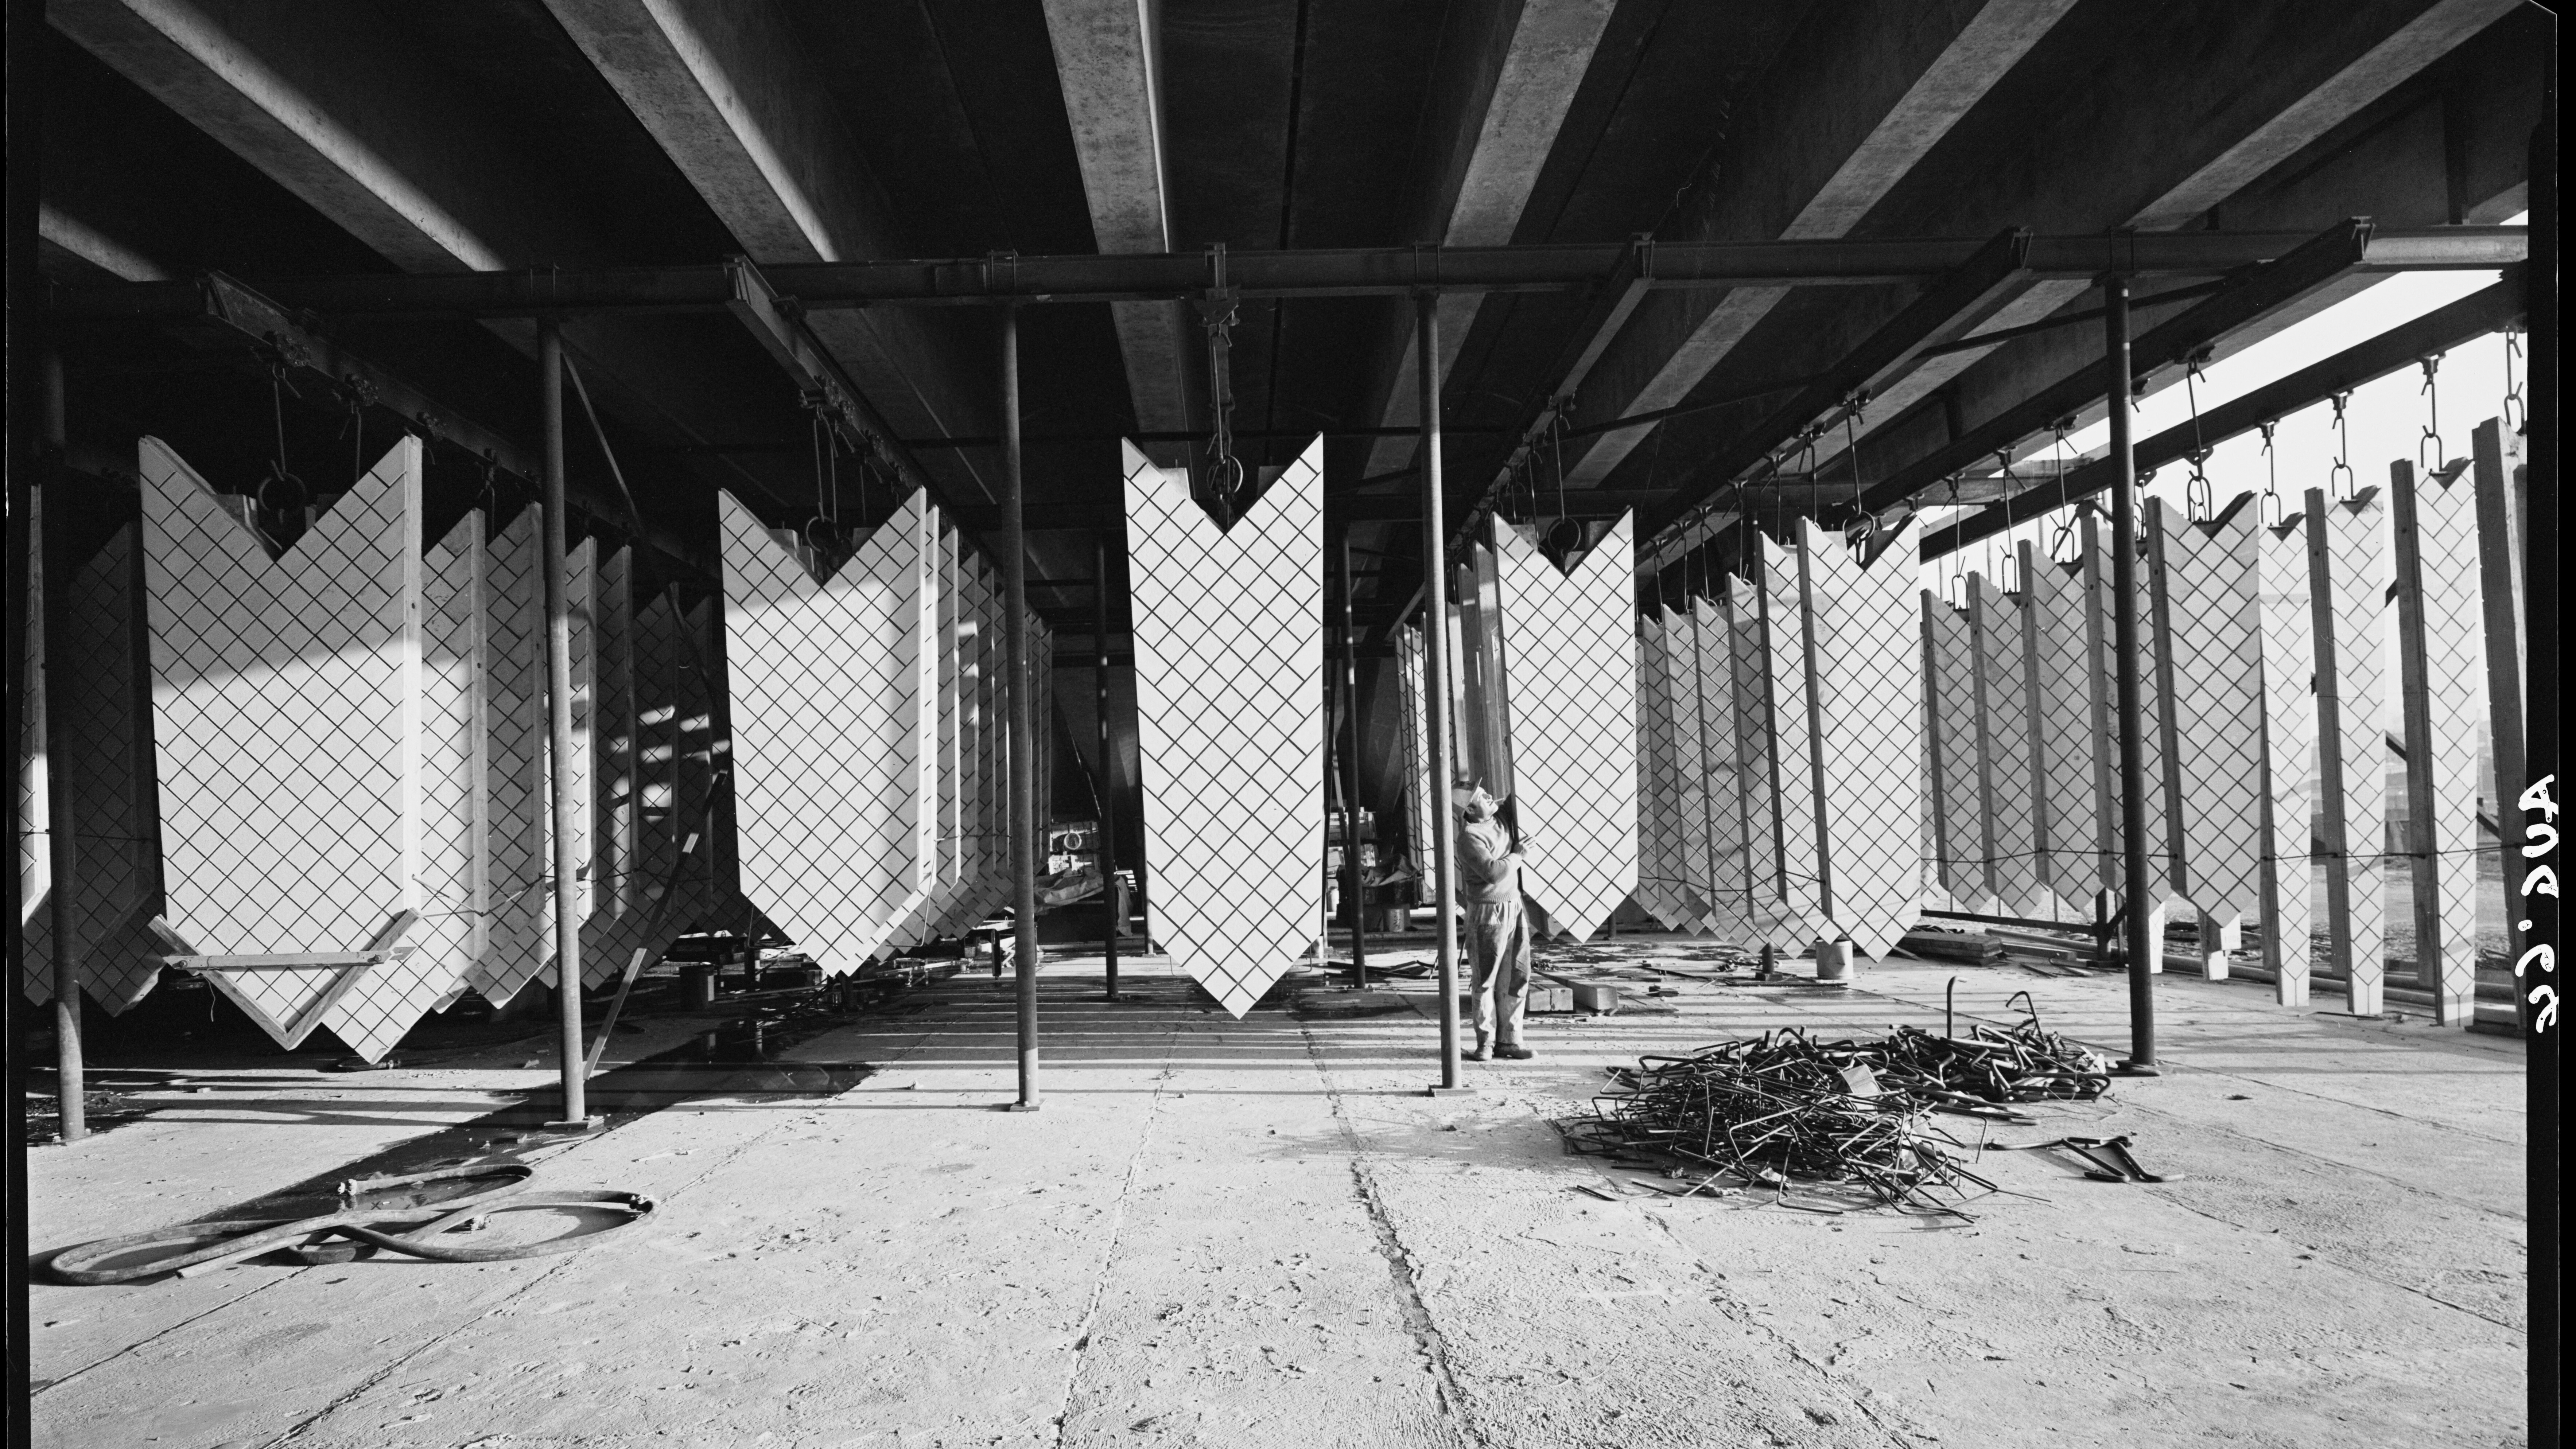 Tile drying storage, August 1964, Max Dupain. Mitchell Library, State Library of NSW [ON 562/nos. 370-372]